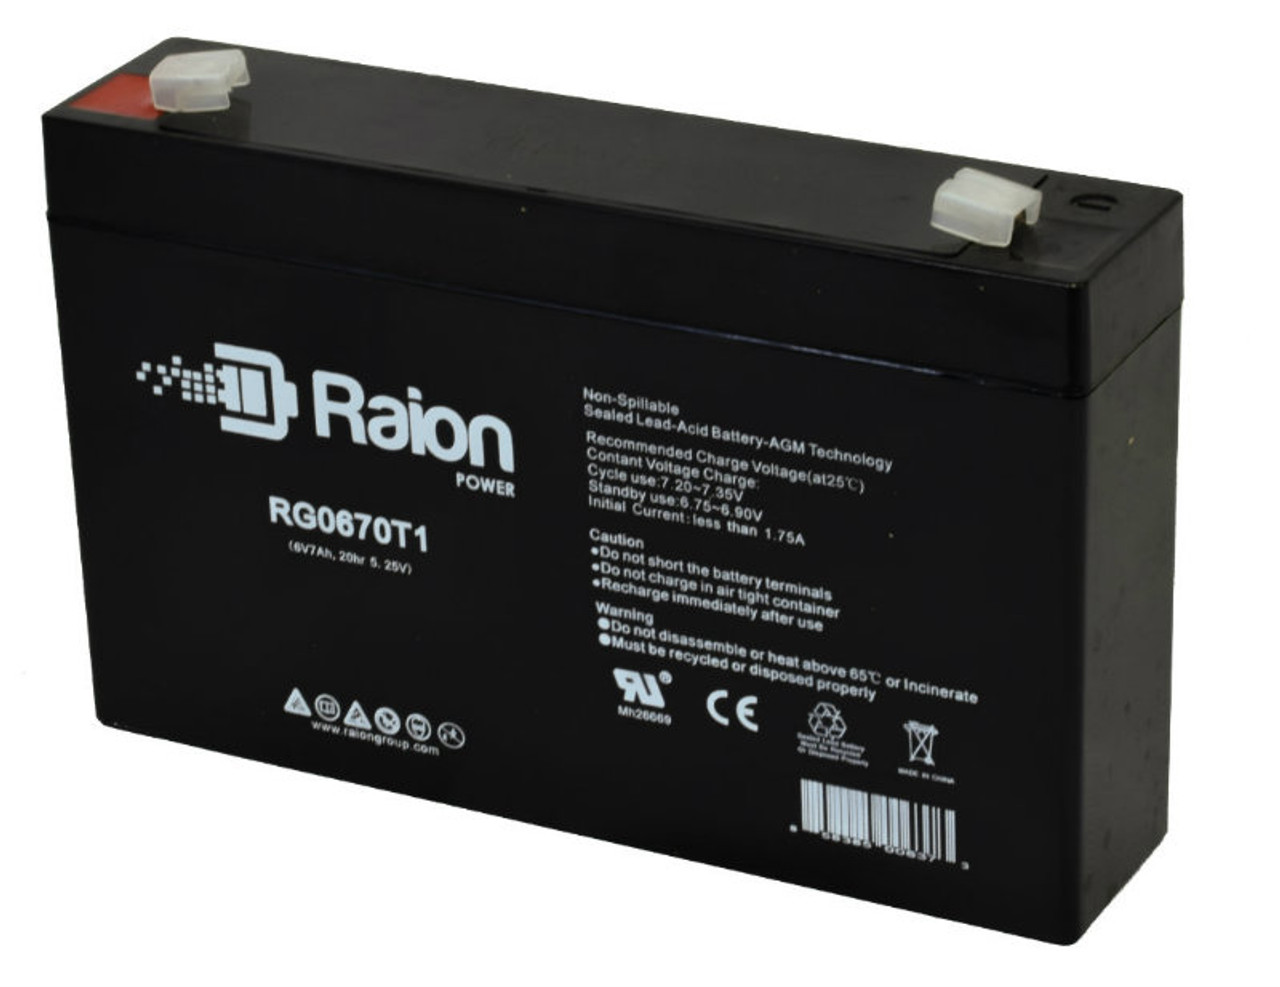 Raion Power RG0670T1 6V 7Ah Replacement Battery Cartridge for Philips Medical Systems Pagewriter ECG1721A 1700 XLI Medical Equipment